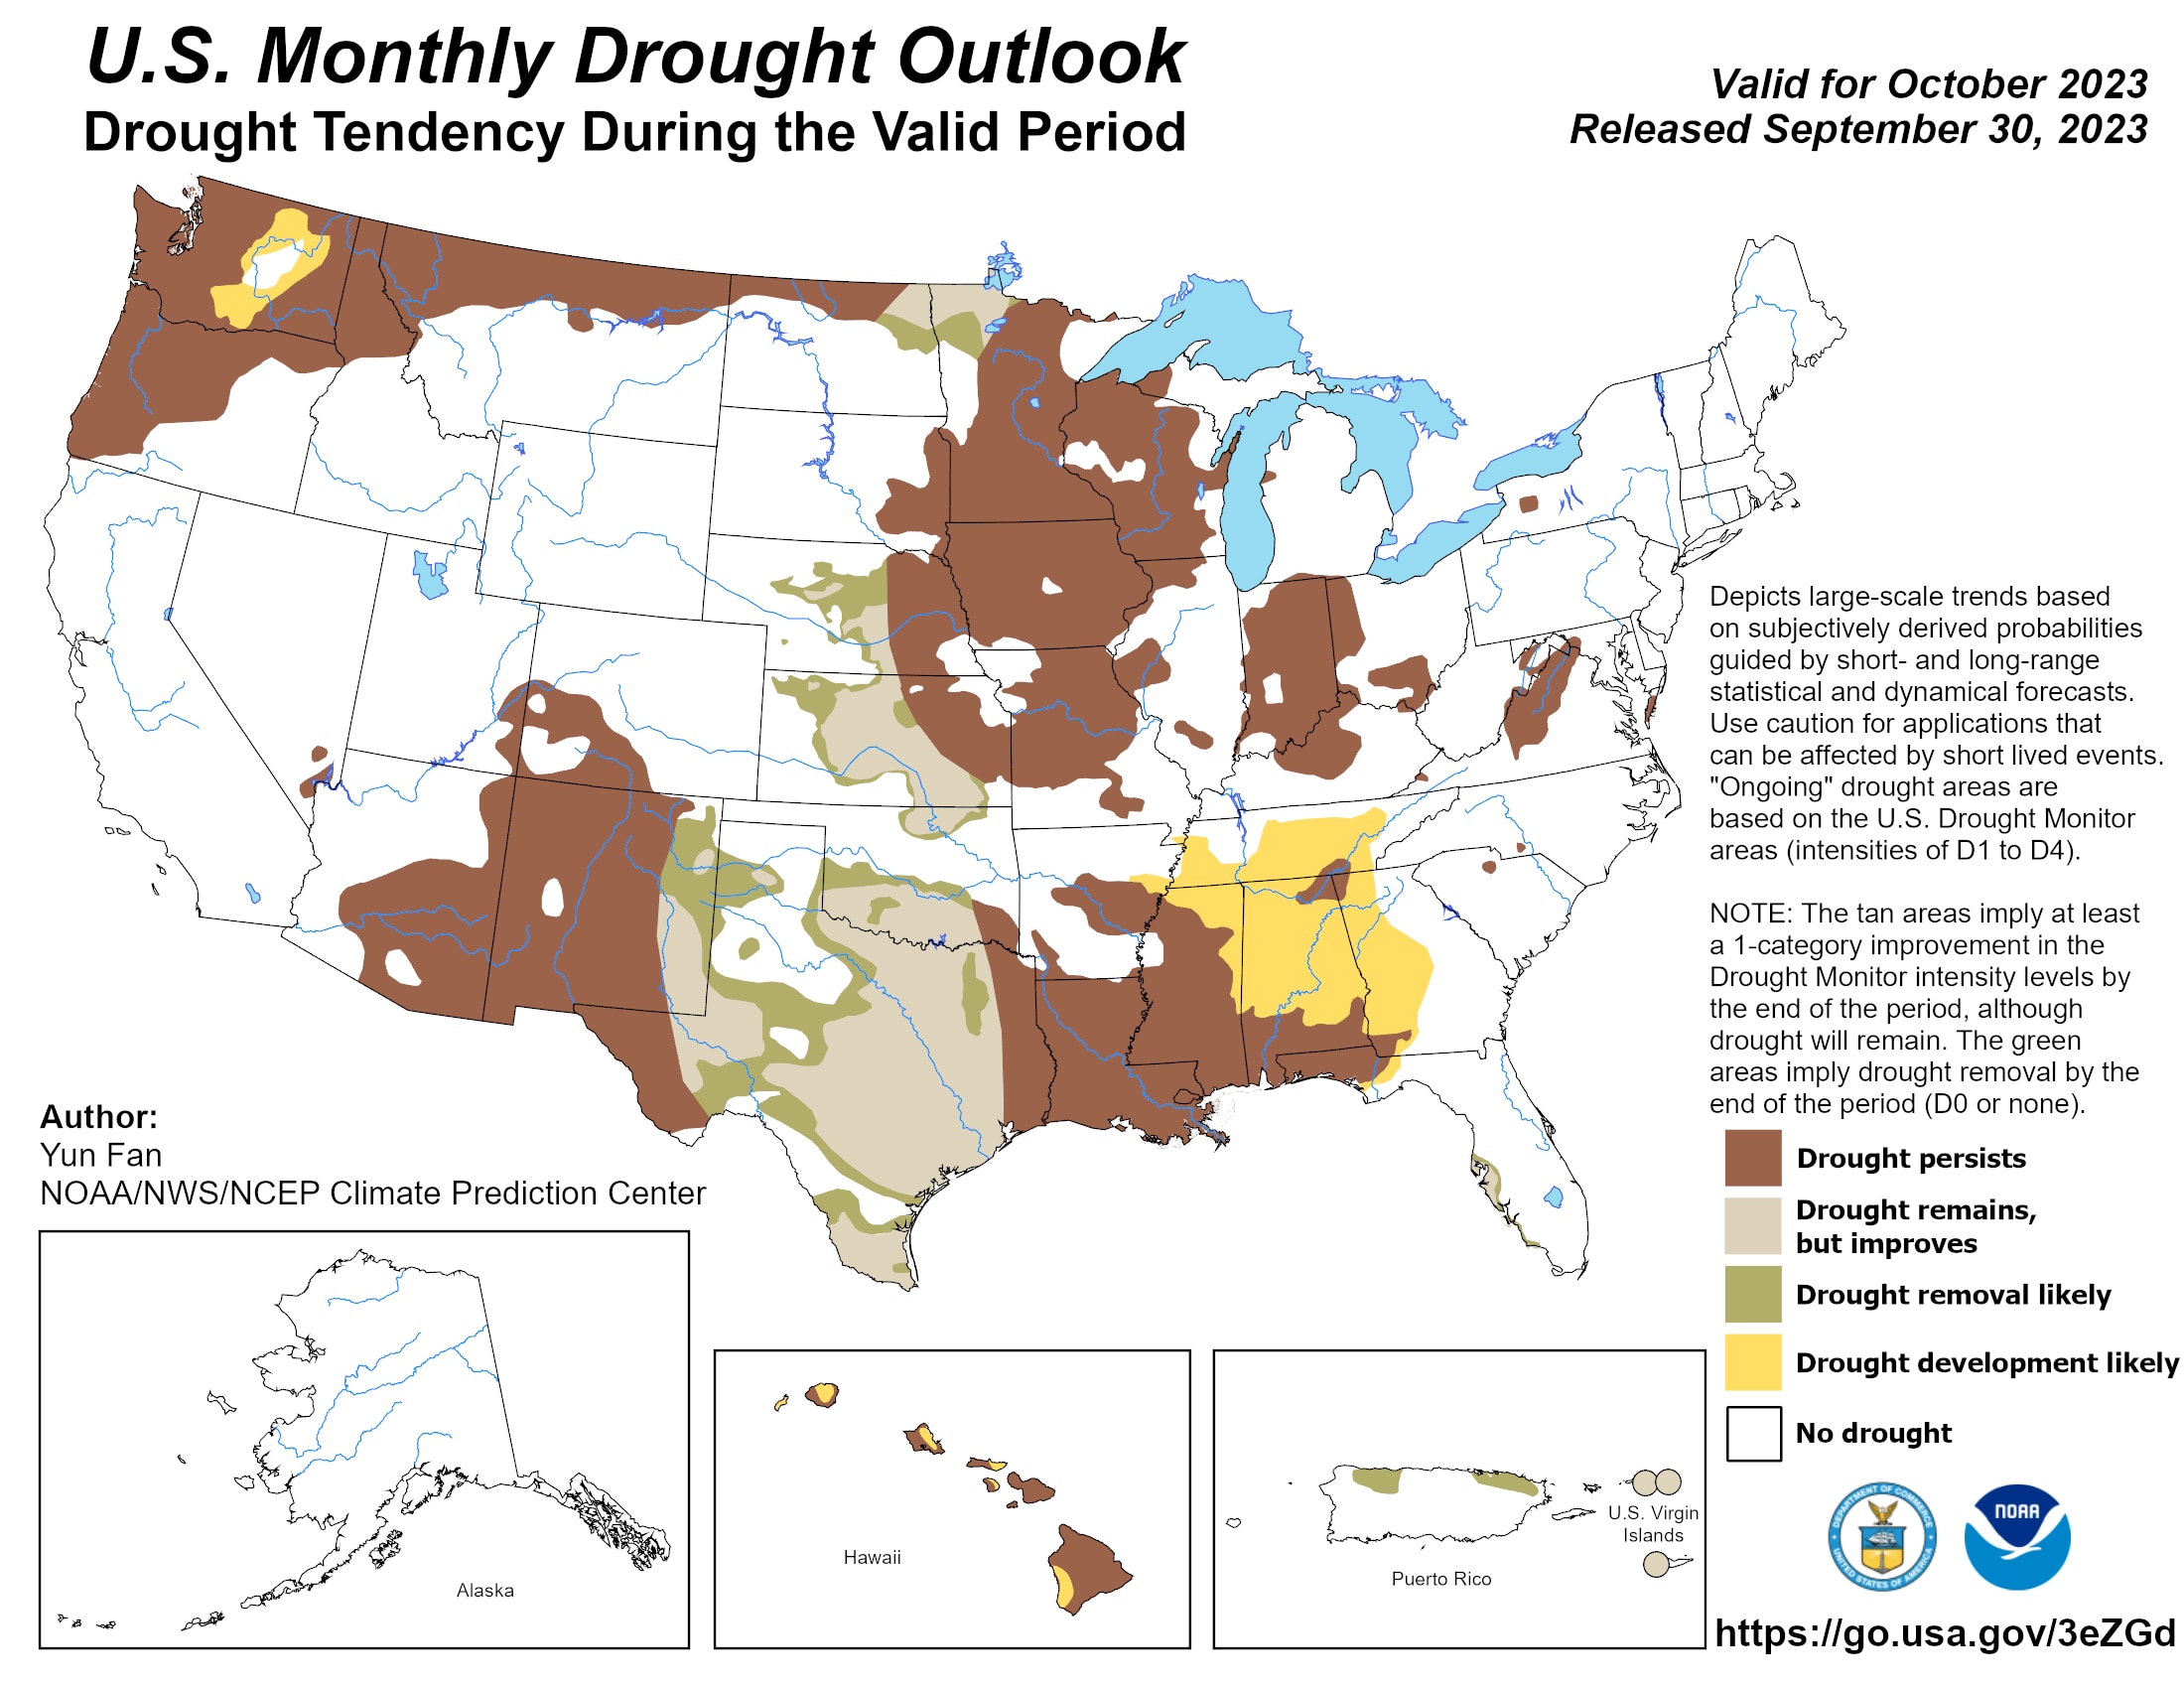 The National Weather Service Climate Prediction Center's Monthly Drought Outlook is issued at the end of each calendar month and is valid for the upcoming month. The outlook predicts whether drought will persist, develop, improve, or be removed over the next 30 days or so. 